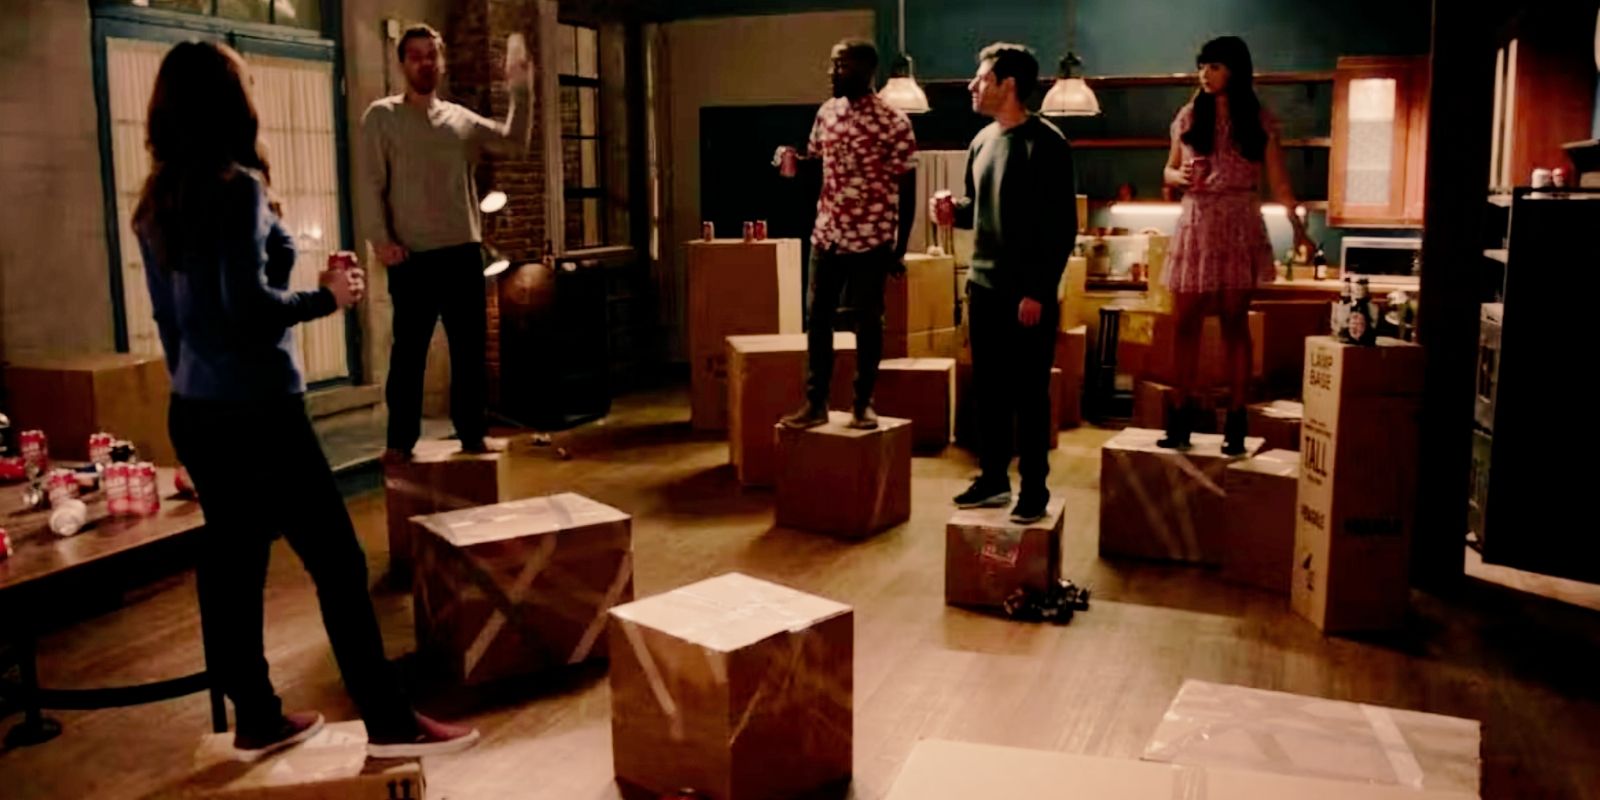 New Girl: "True American" Drinking Game Rules